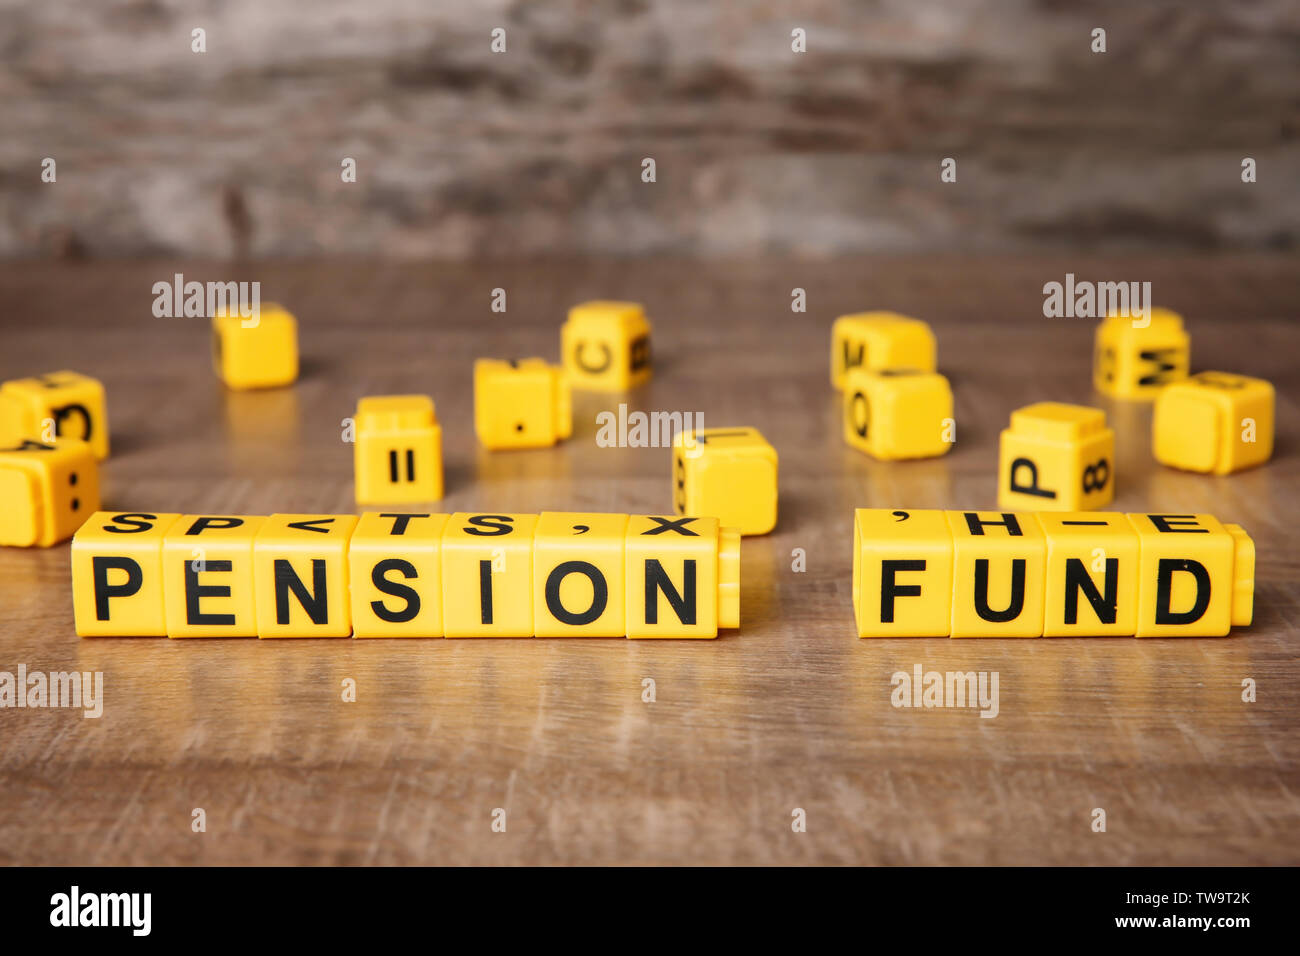 Words 'Pension fund' on wooden table Stock Photo